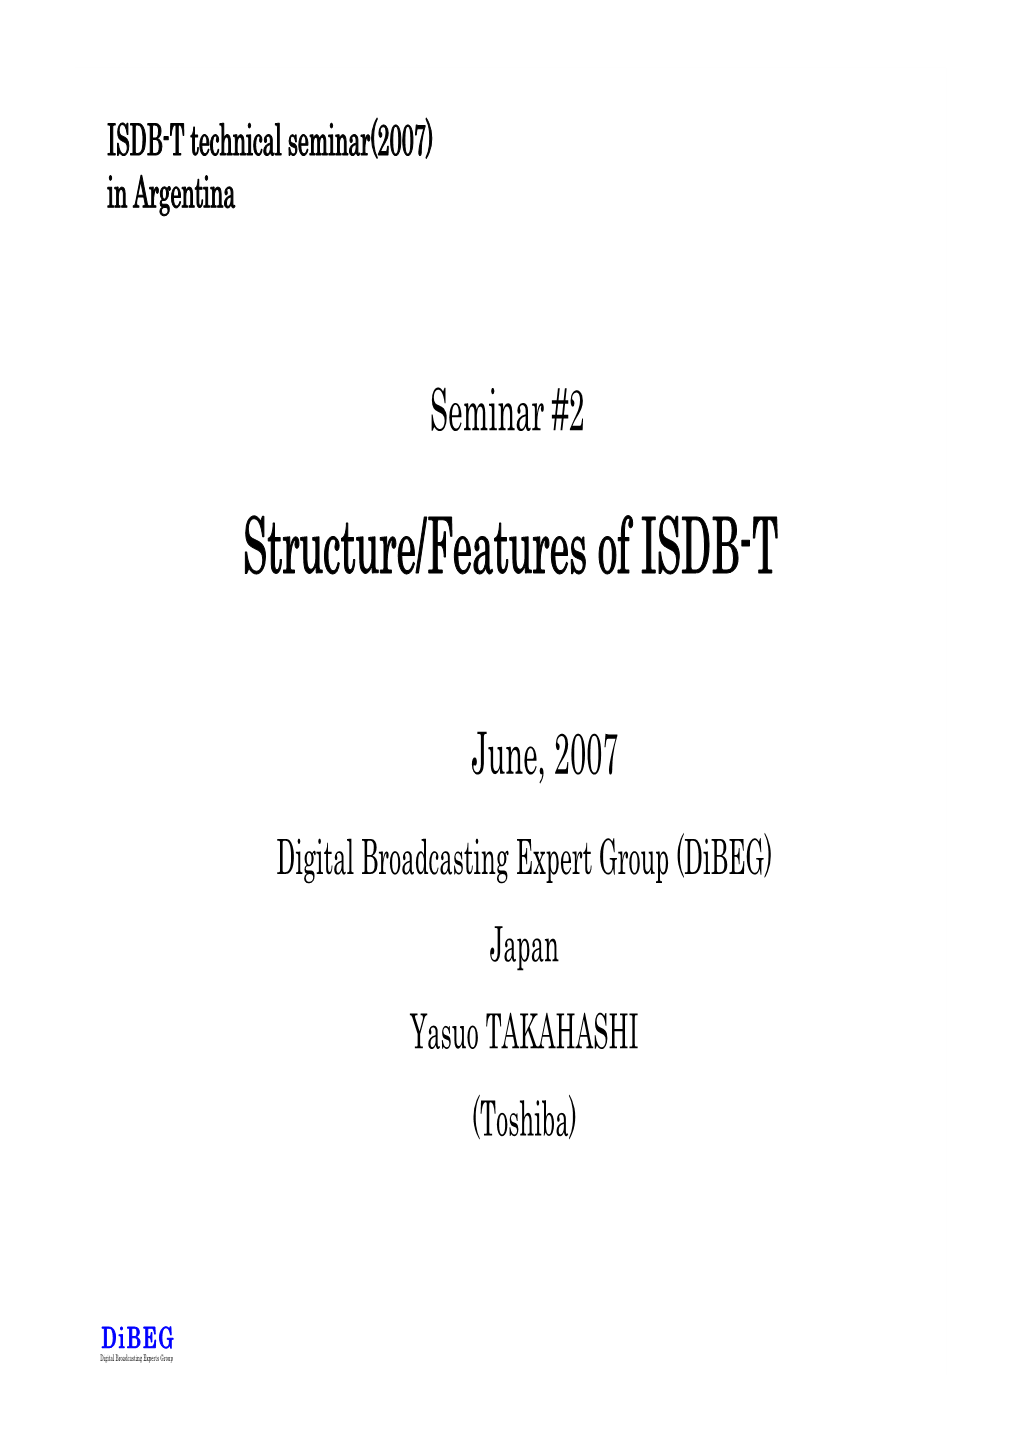 Structure/Features of ISDB-T